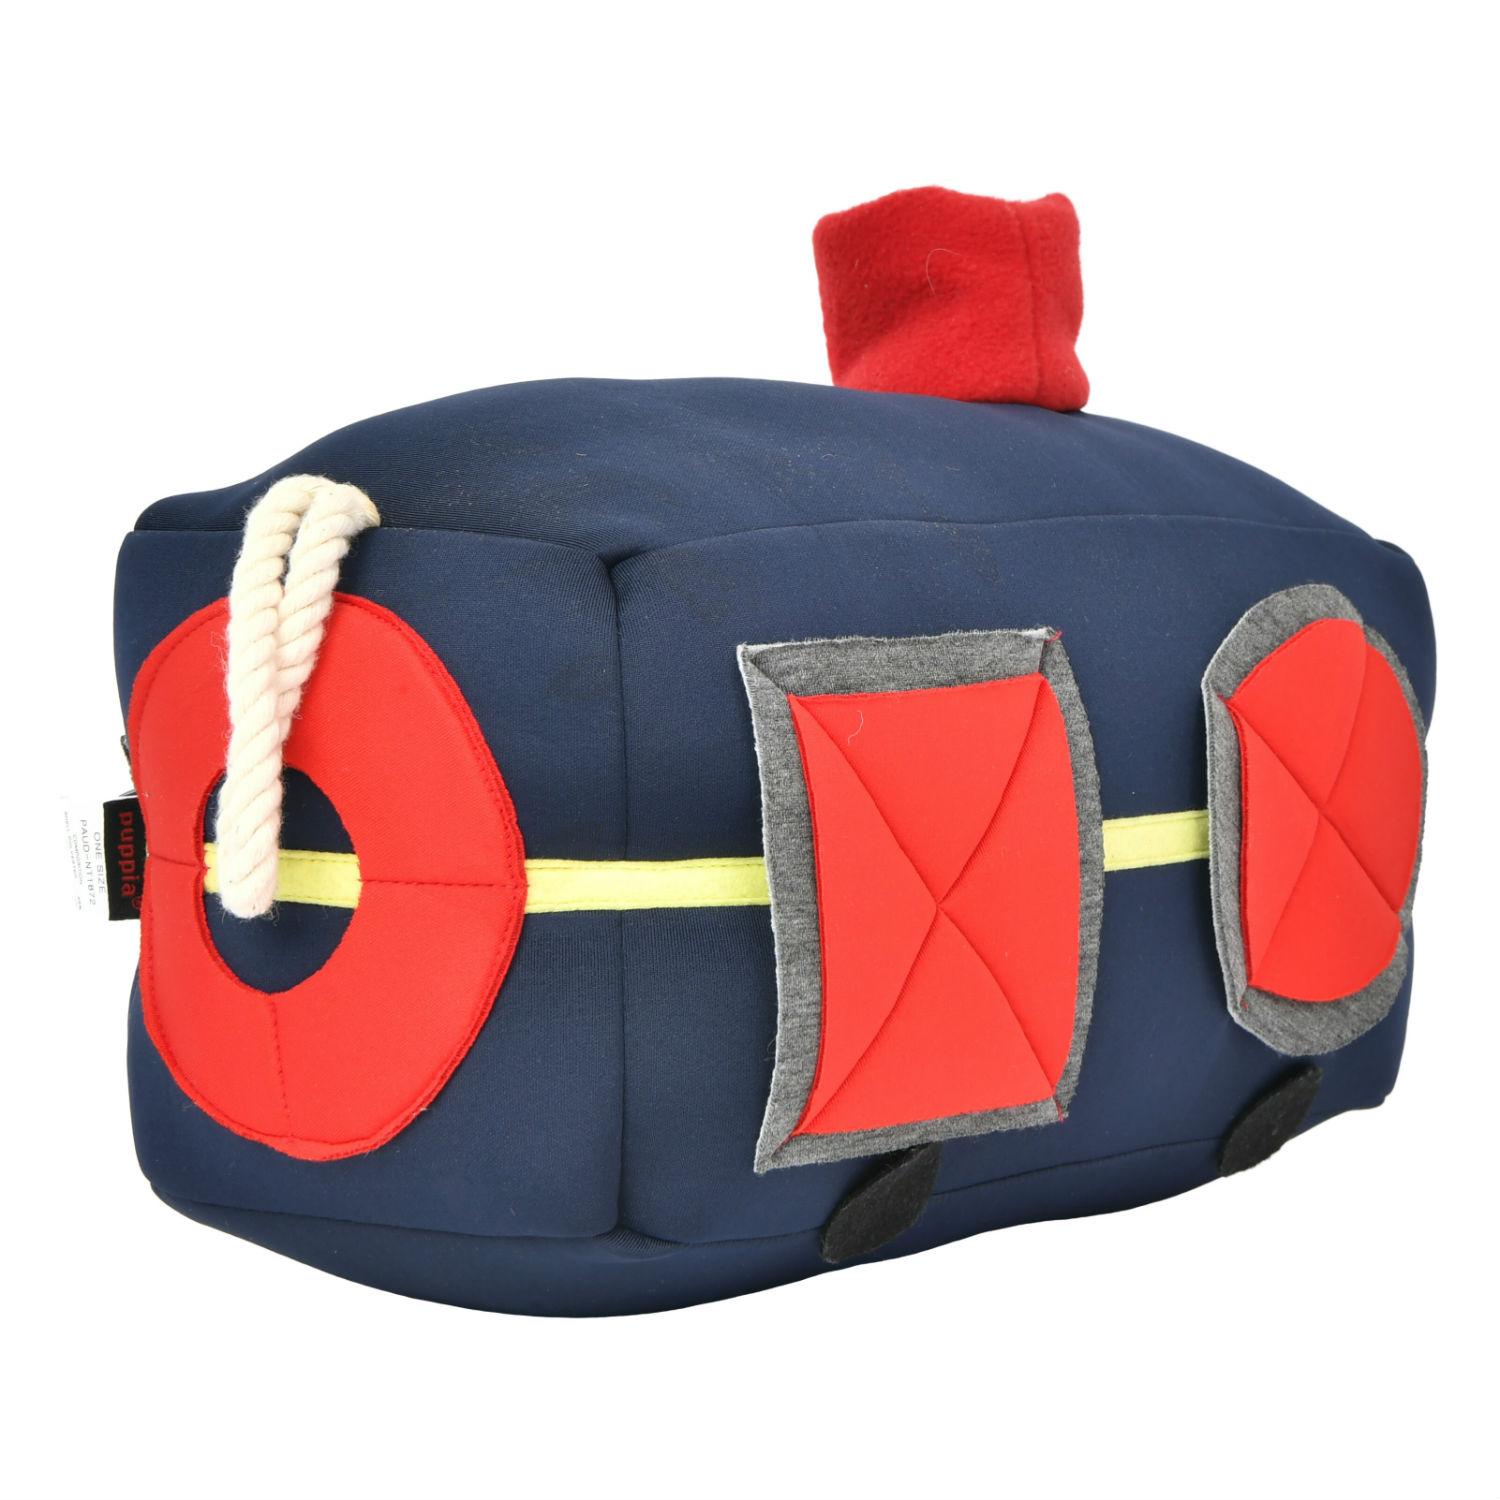 Pup Bus Dog Toy by Puppia - Navy